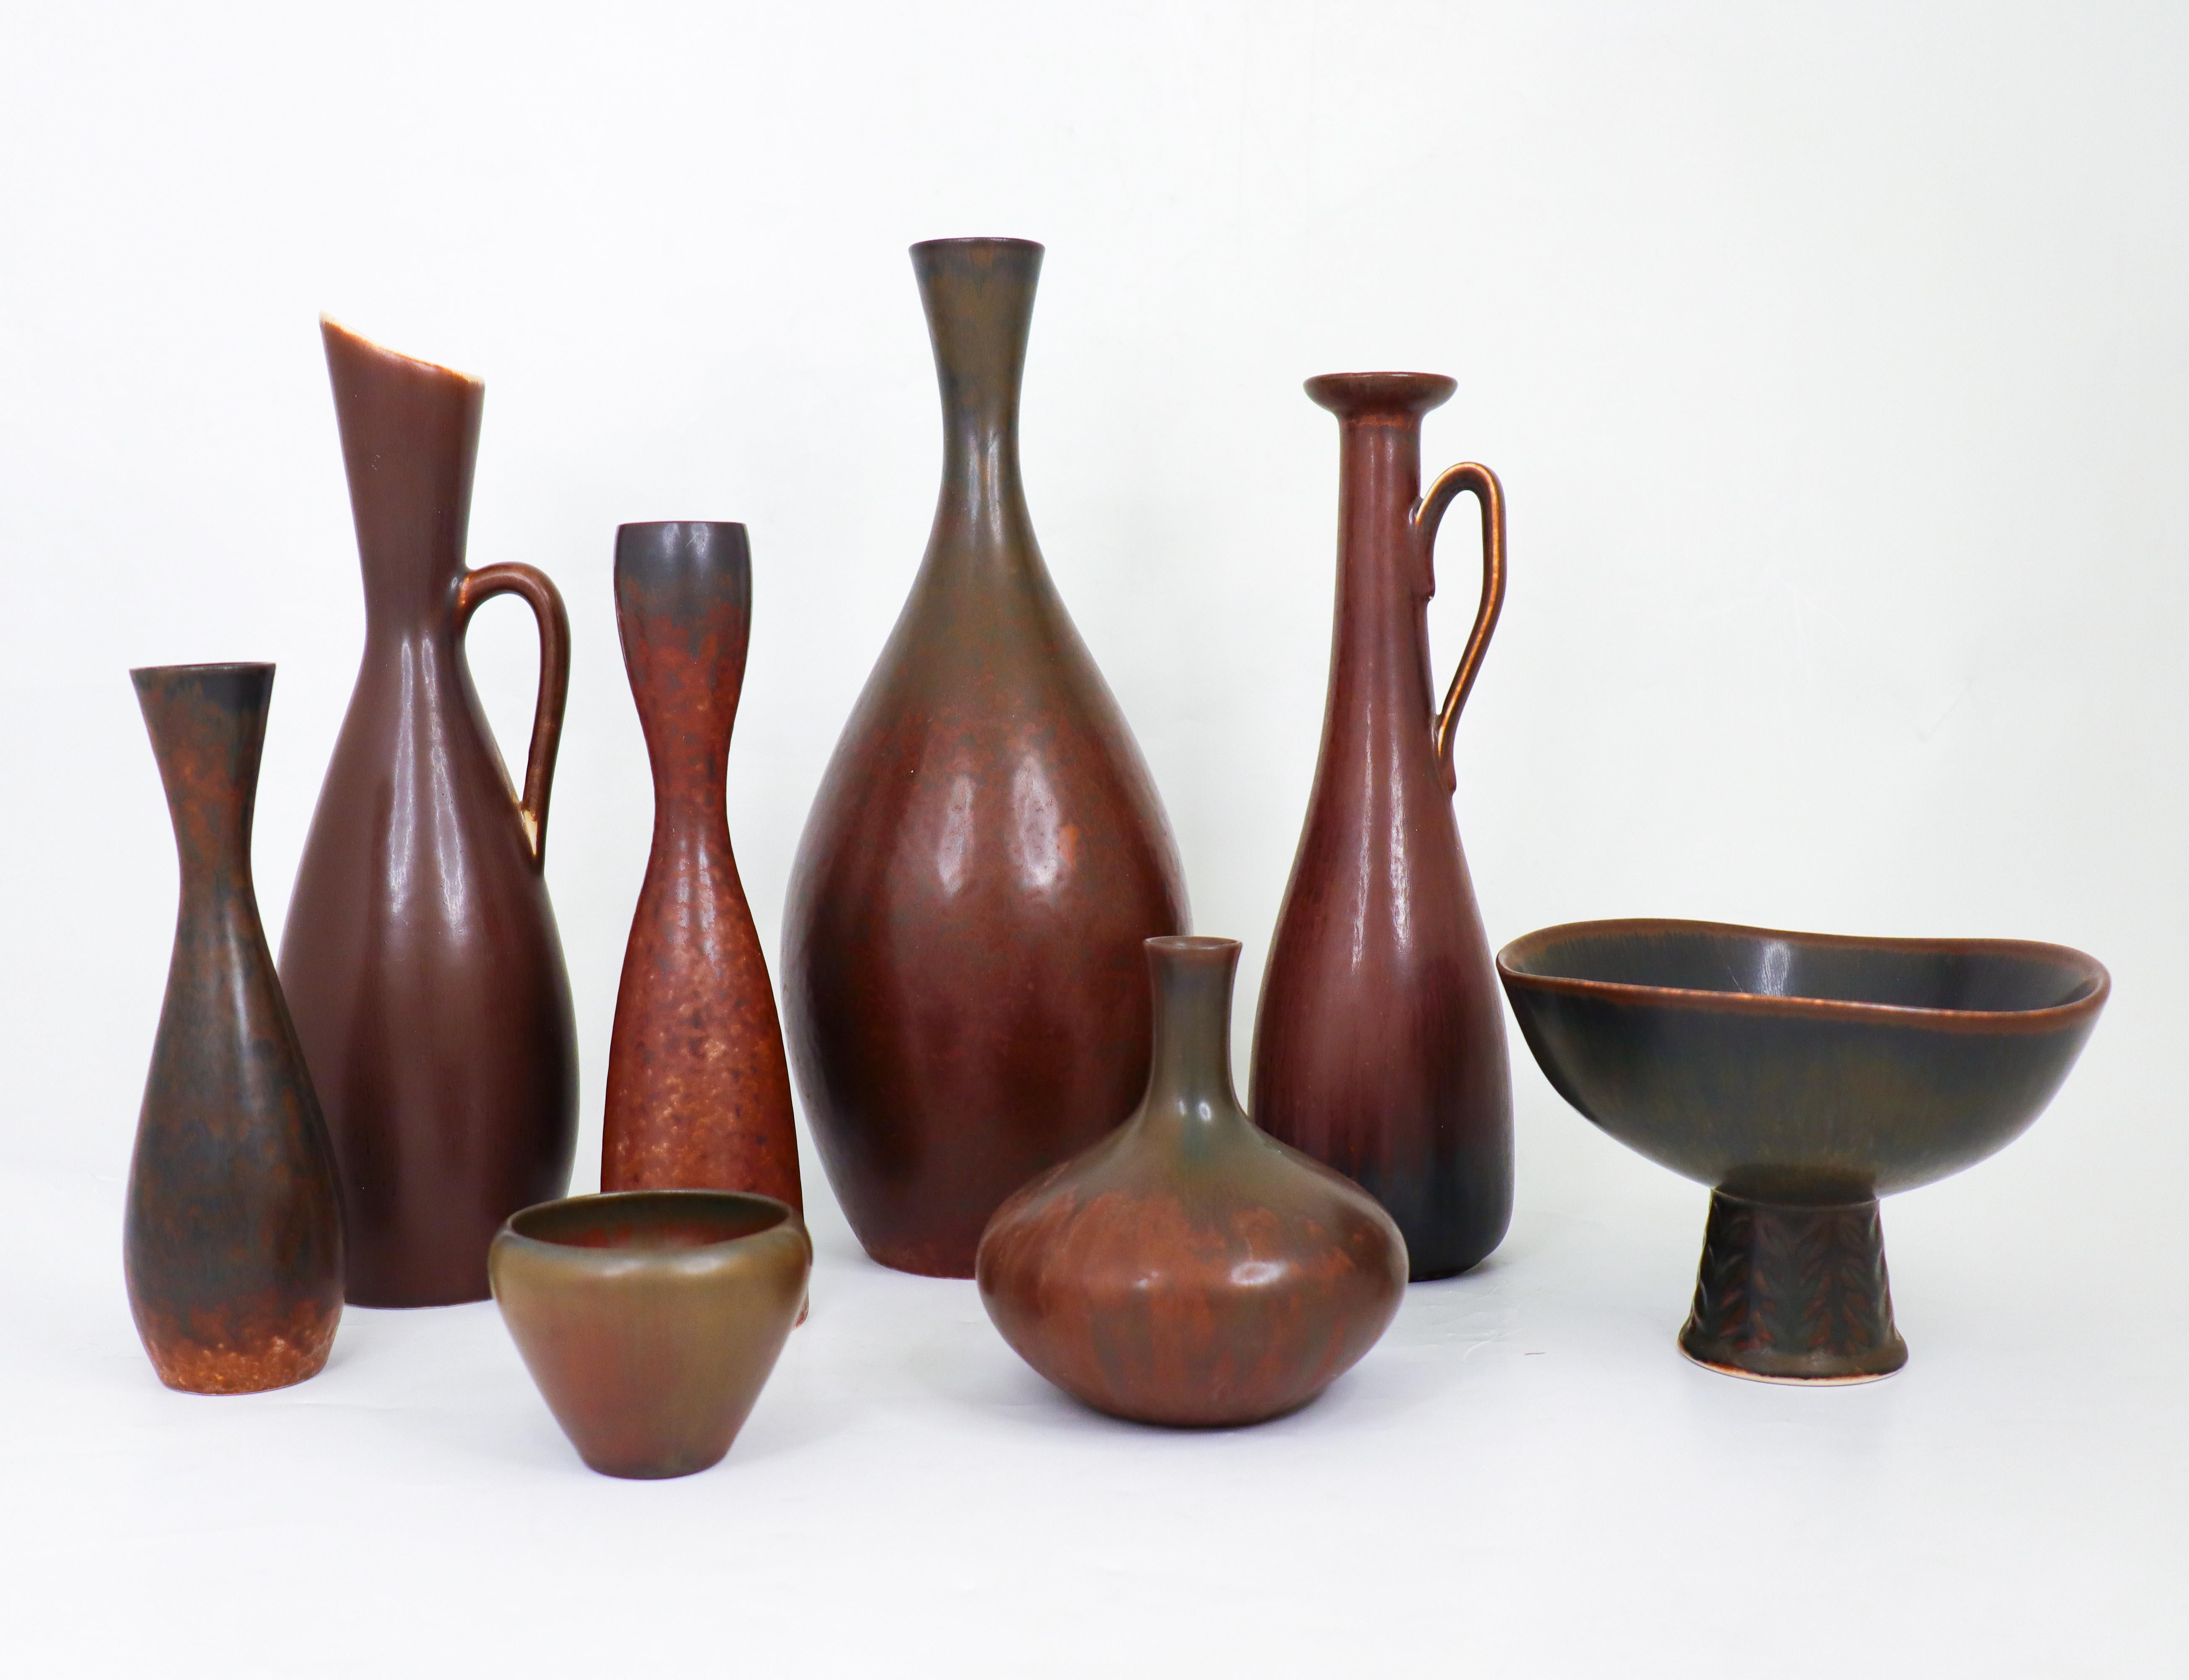 A group of seven vases and bowls by Carl-Harry Stålhane, two bowls at Rörstrand and one vase by Gunnar Nylund in the 1950s and 1960s. The vases are between 6.5 - 25.5 cm high and in excellent condition. They are between 5 - 28.5 cm high and in